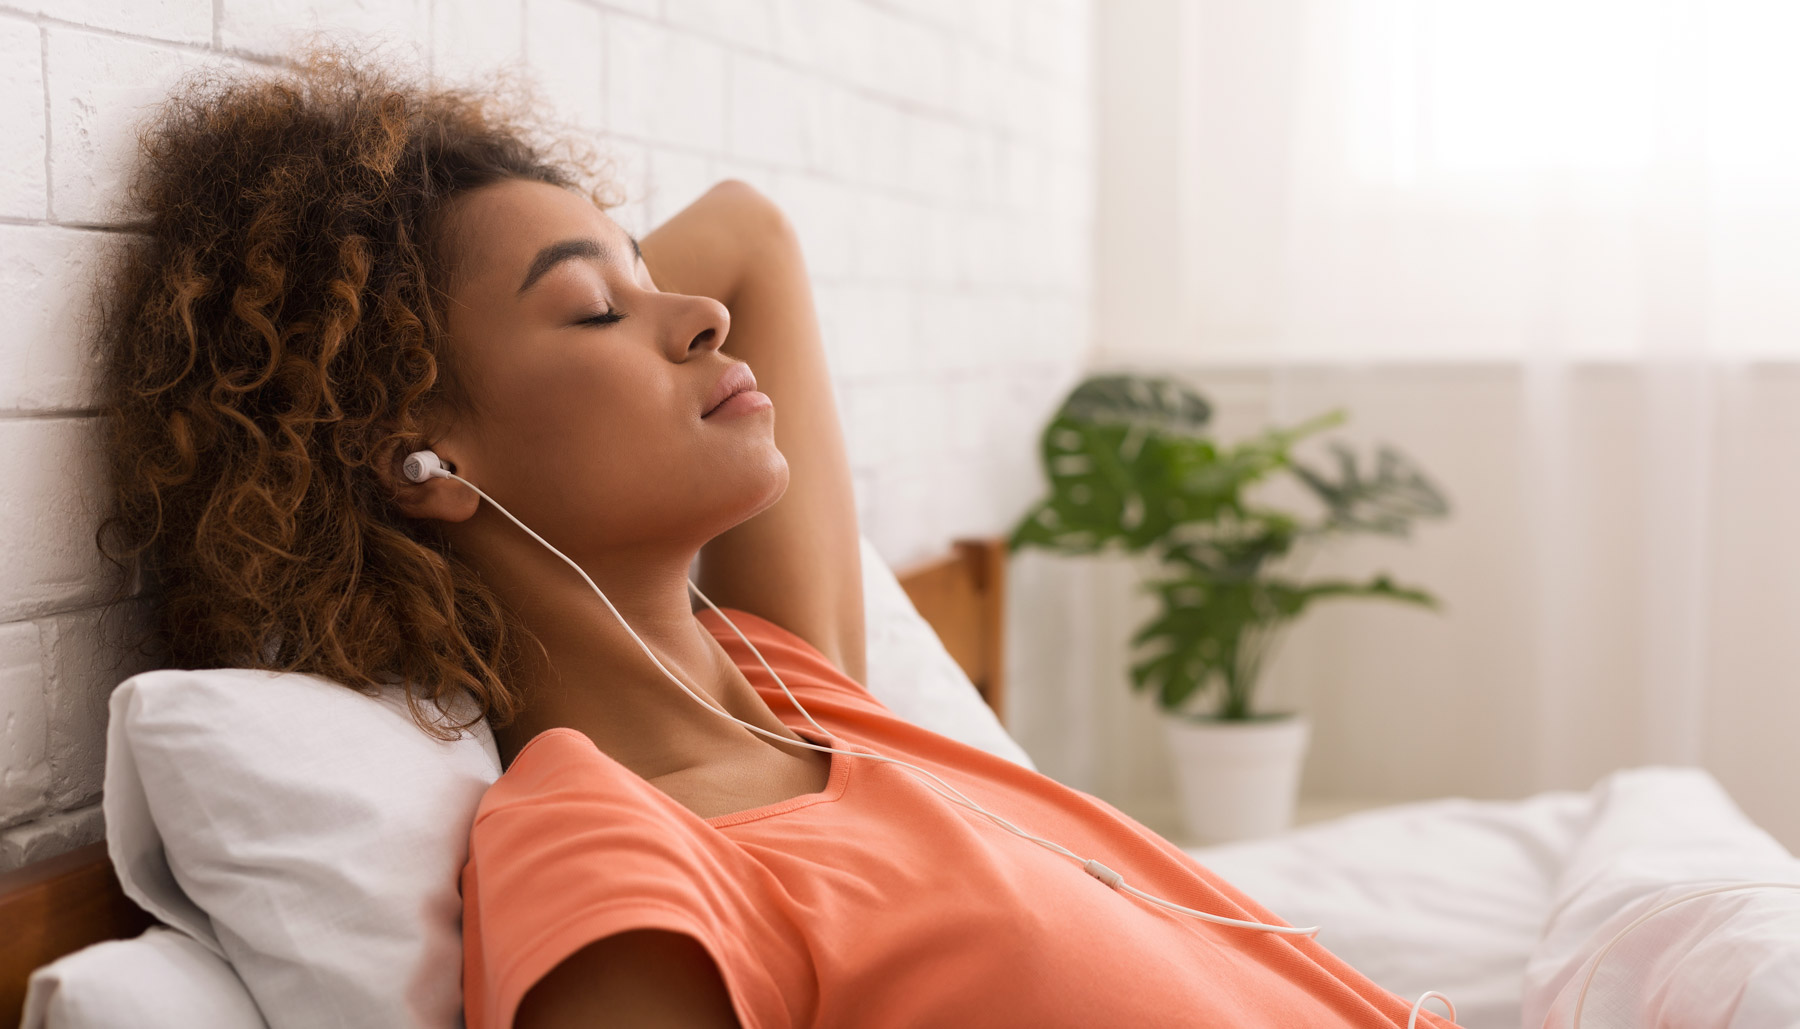 Woman listening to music and resting